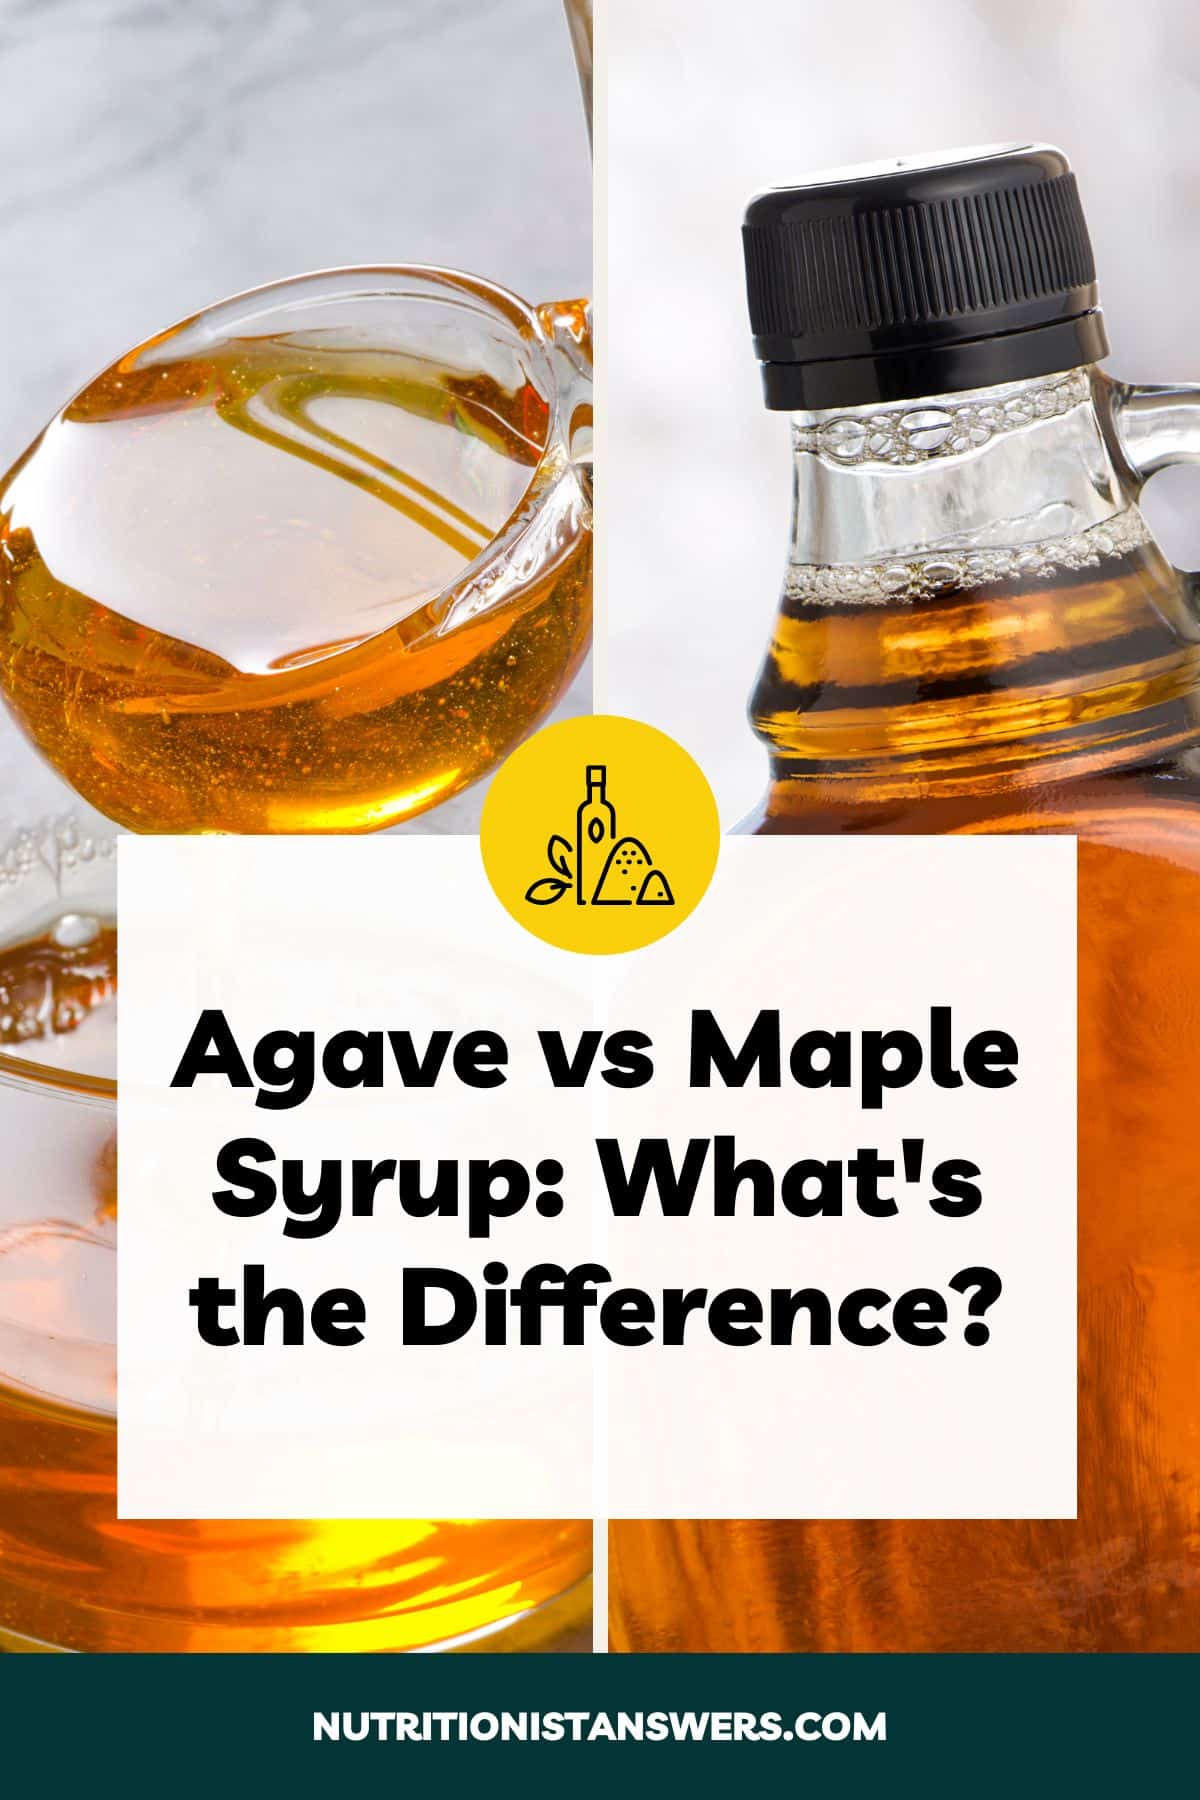 Agave vs Maple Syrup: What’s the Difference?